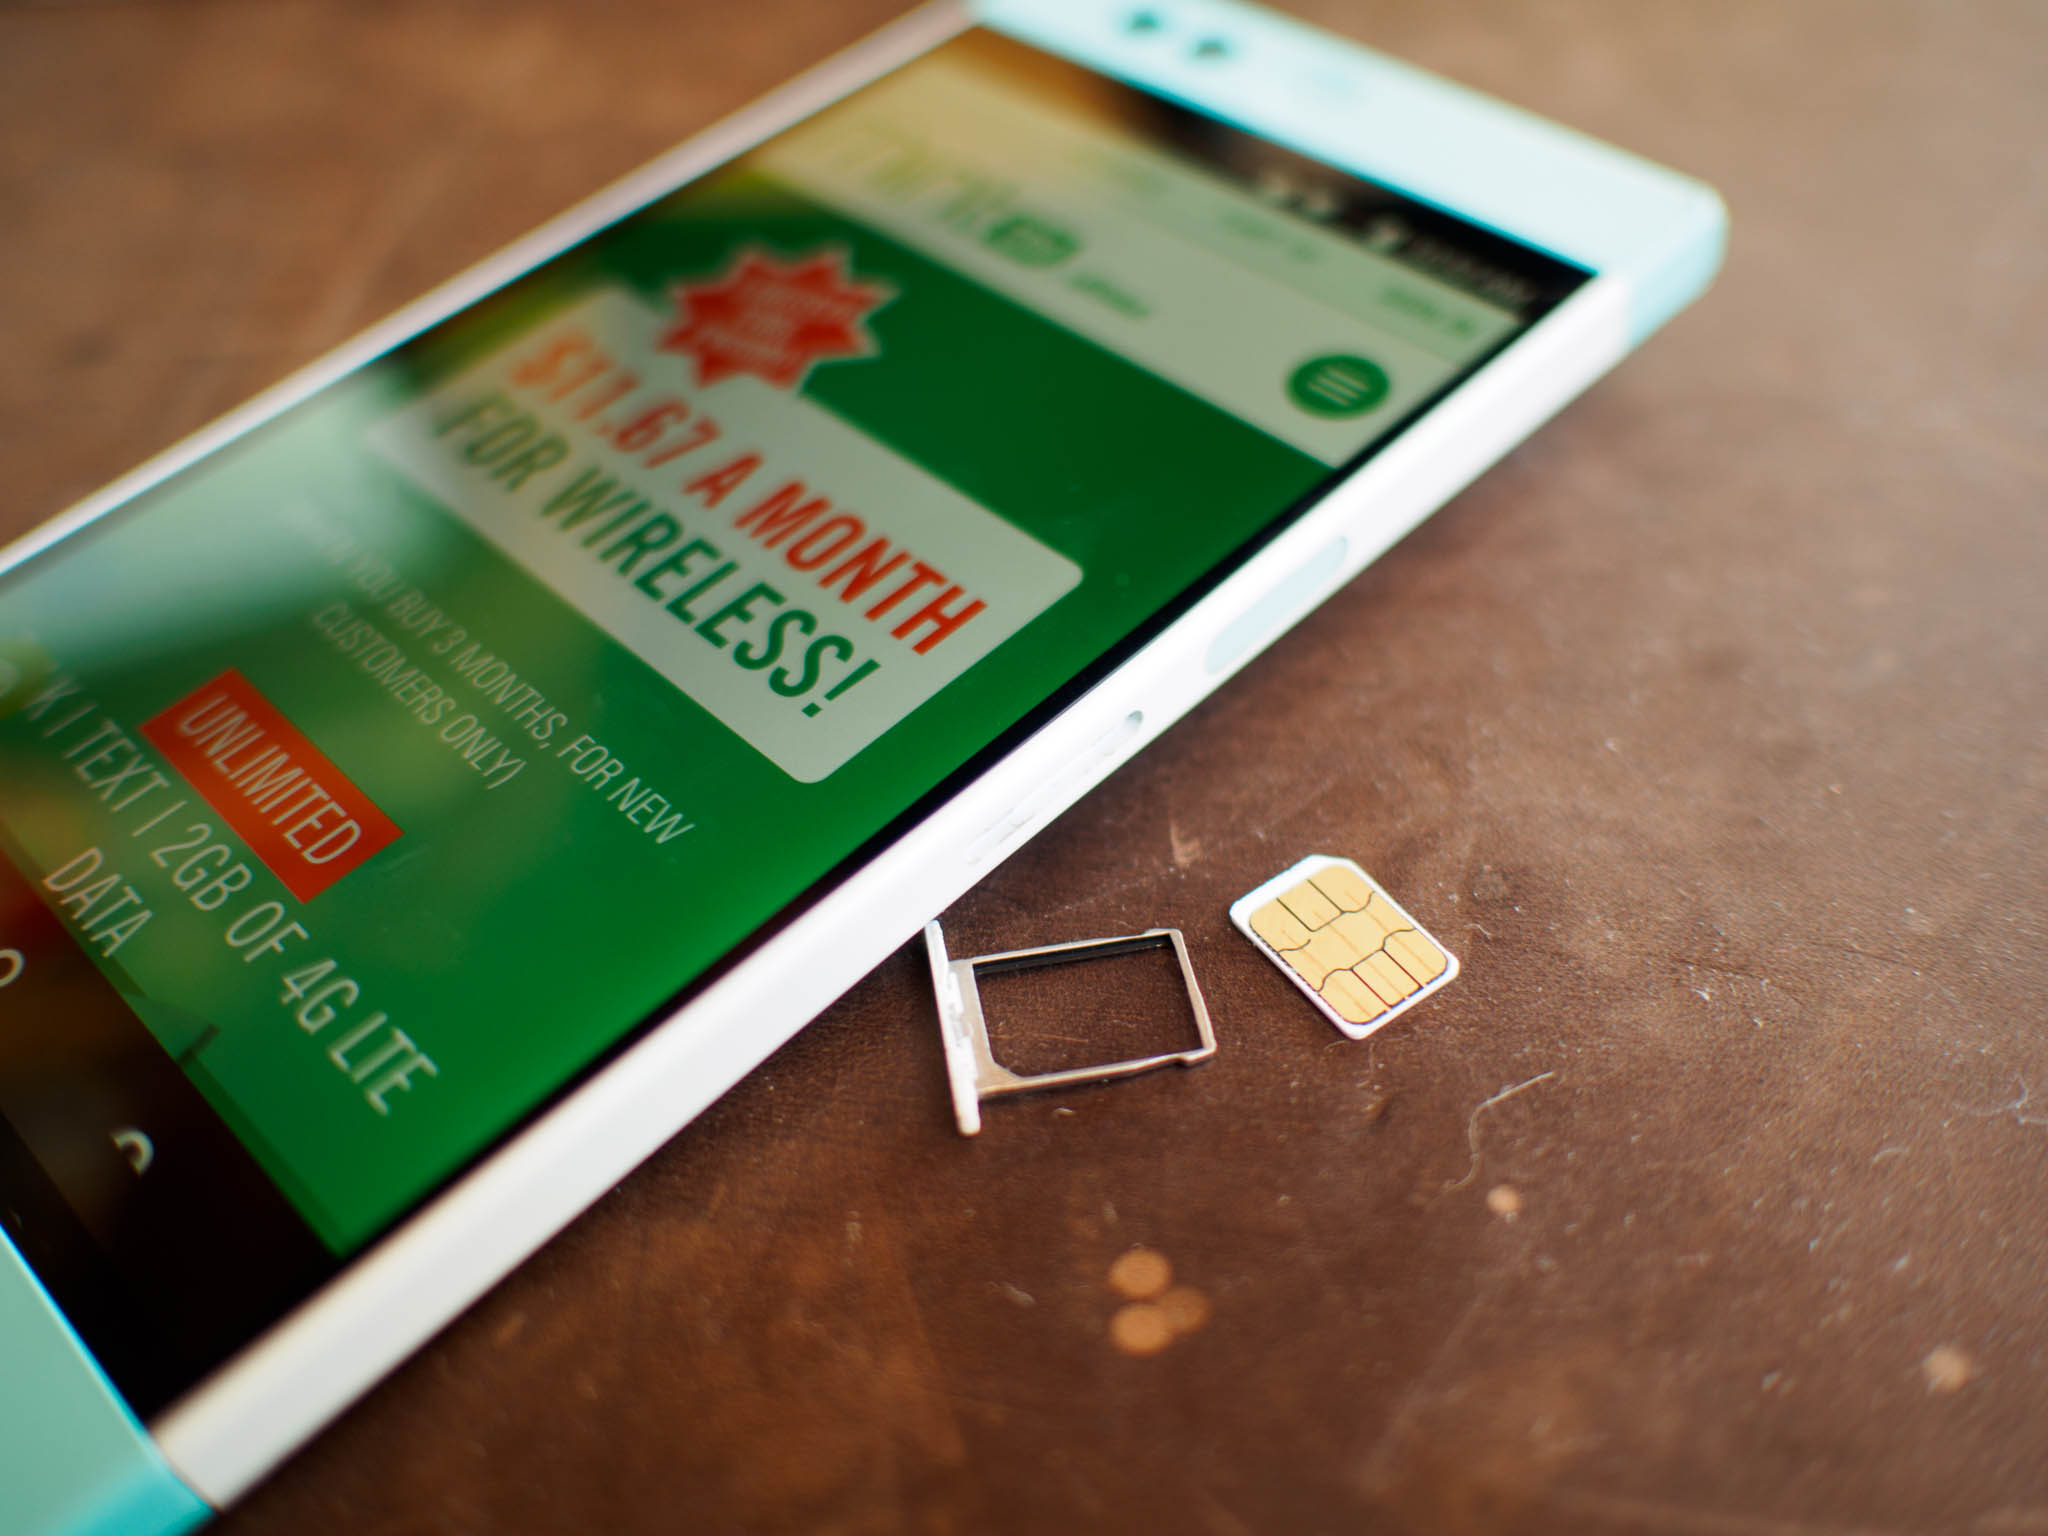 Mint SIM review: The AC community weighs in | Android Central